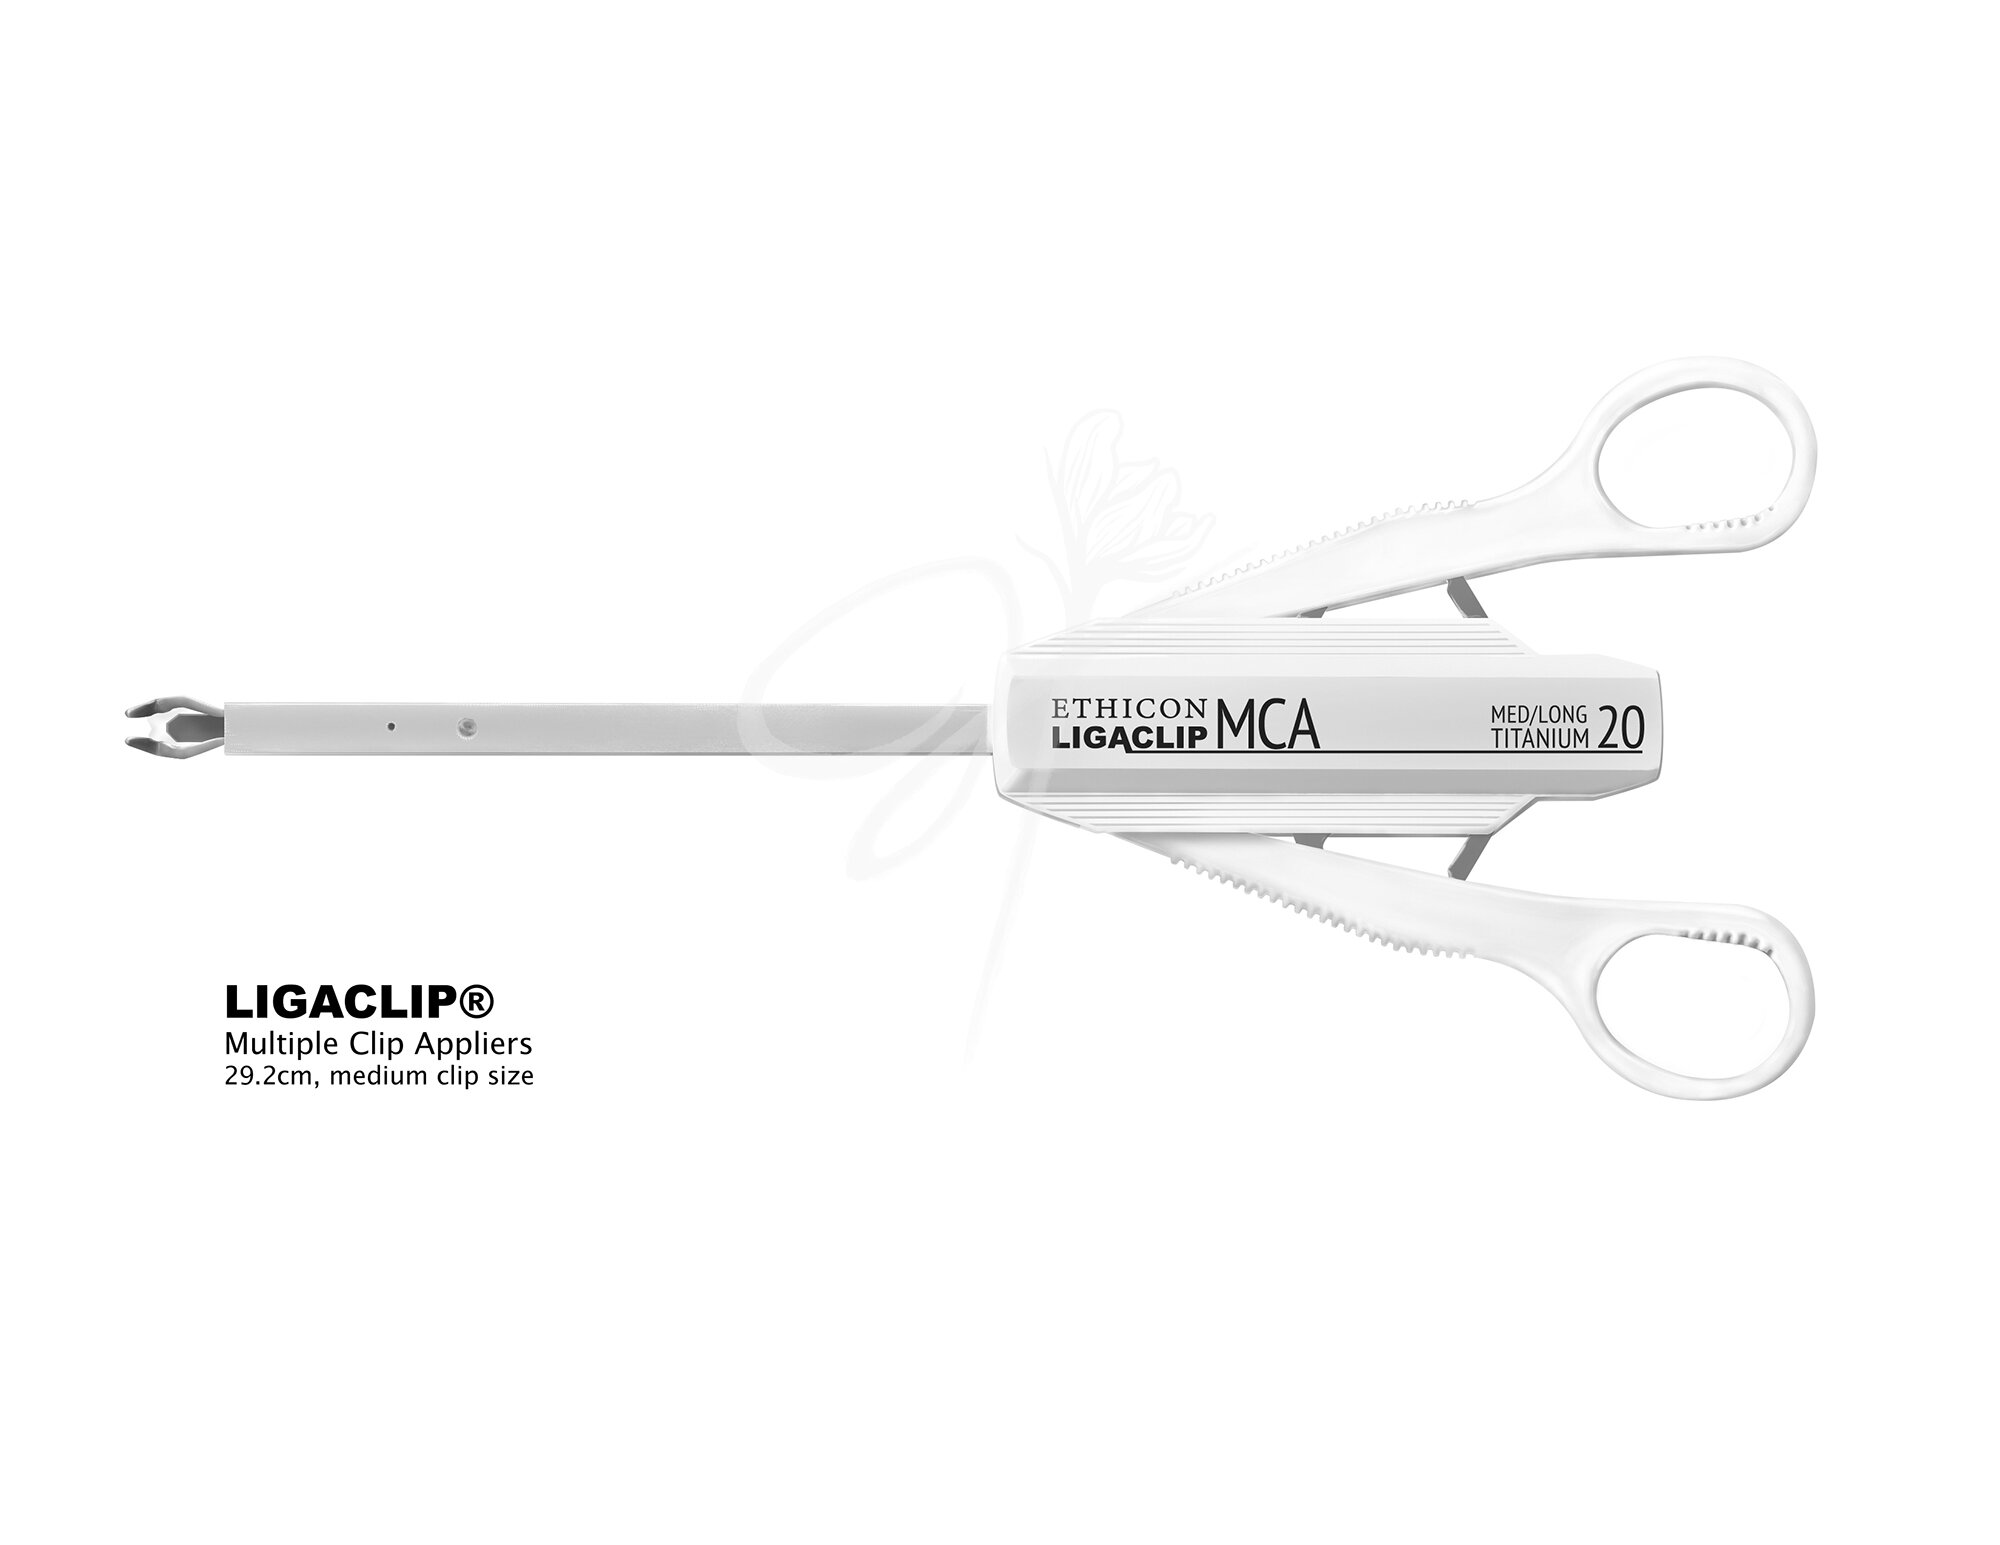   Medium:  Photoshop   Objective:  To illustrate the features of the LIGACLIP Multiple Clip Appliers. 